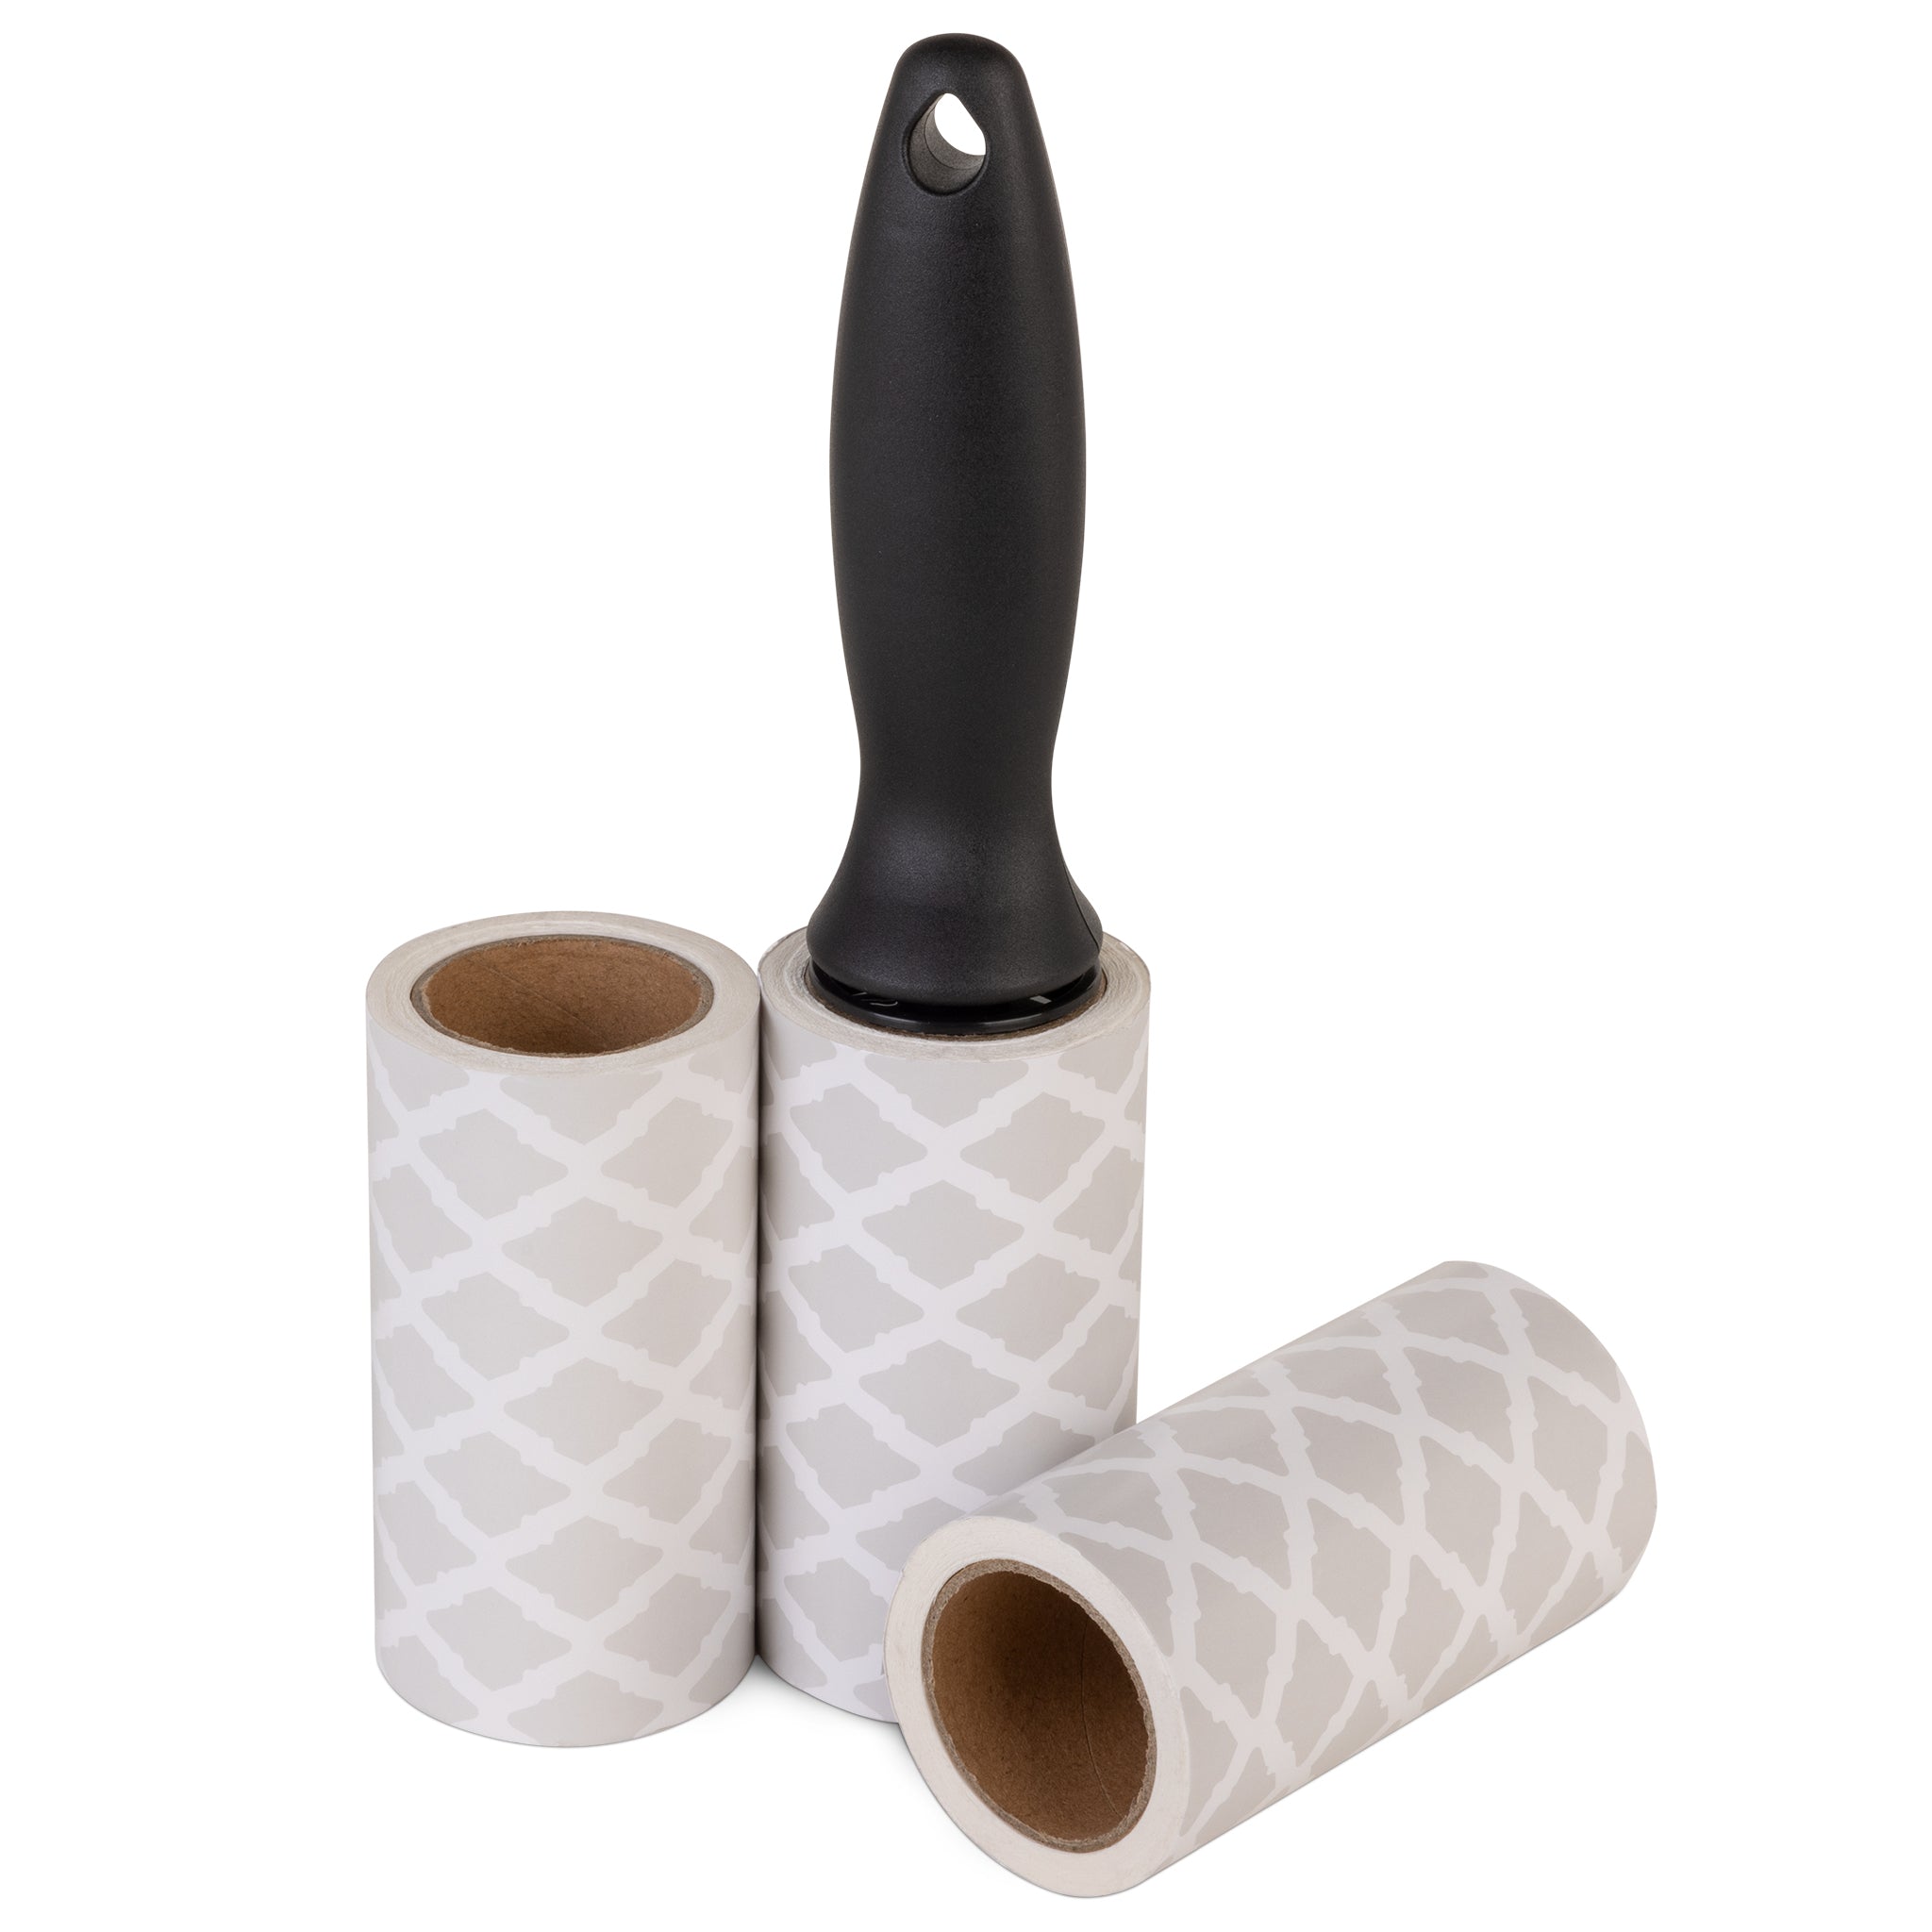 How can I get rid of lint in my black clothes? Lint rollers take